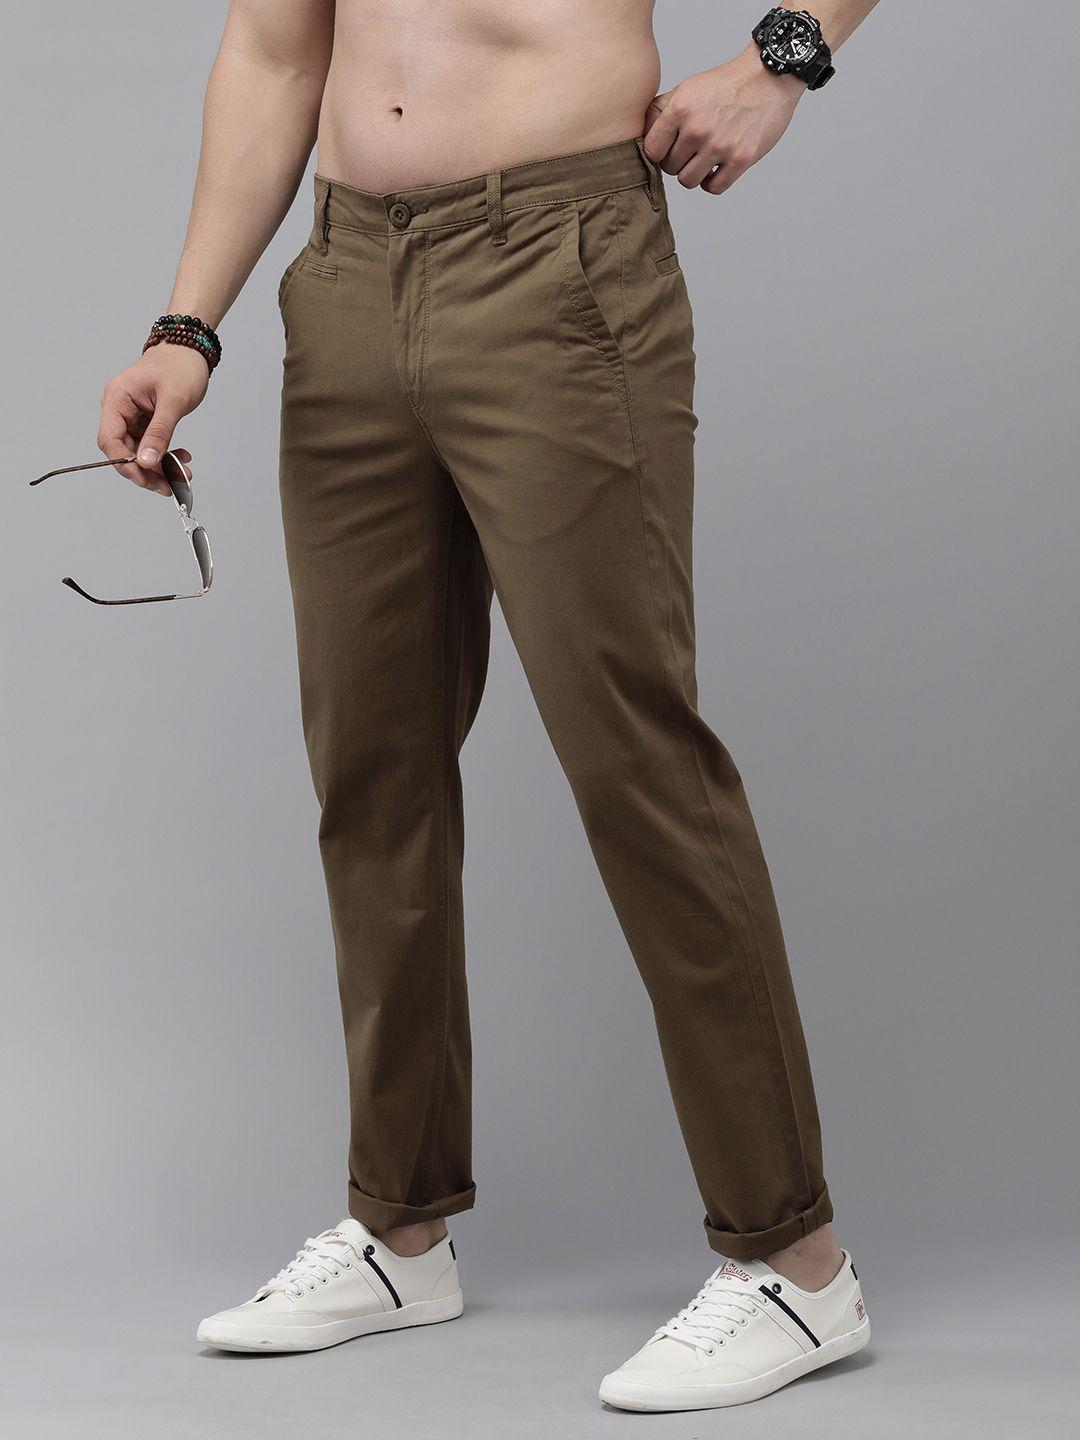 the roadster lifestyle co. men flat front mid rise slim fit trousers